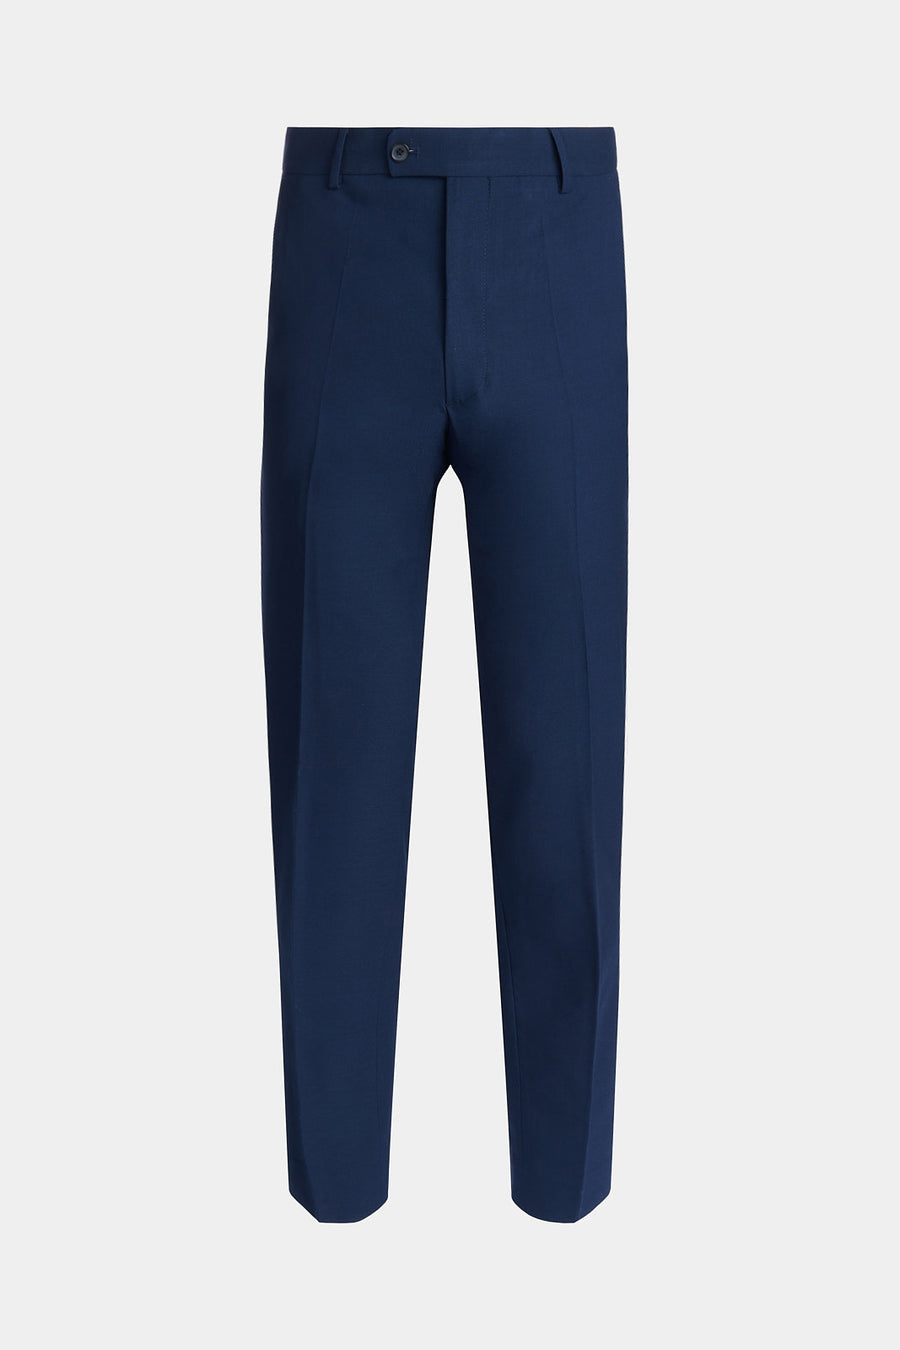 Classic Plain Front Trouser in Navy Blue